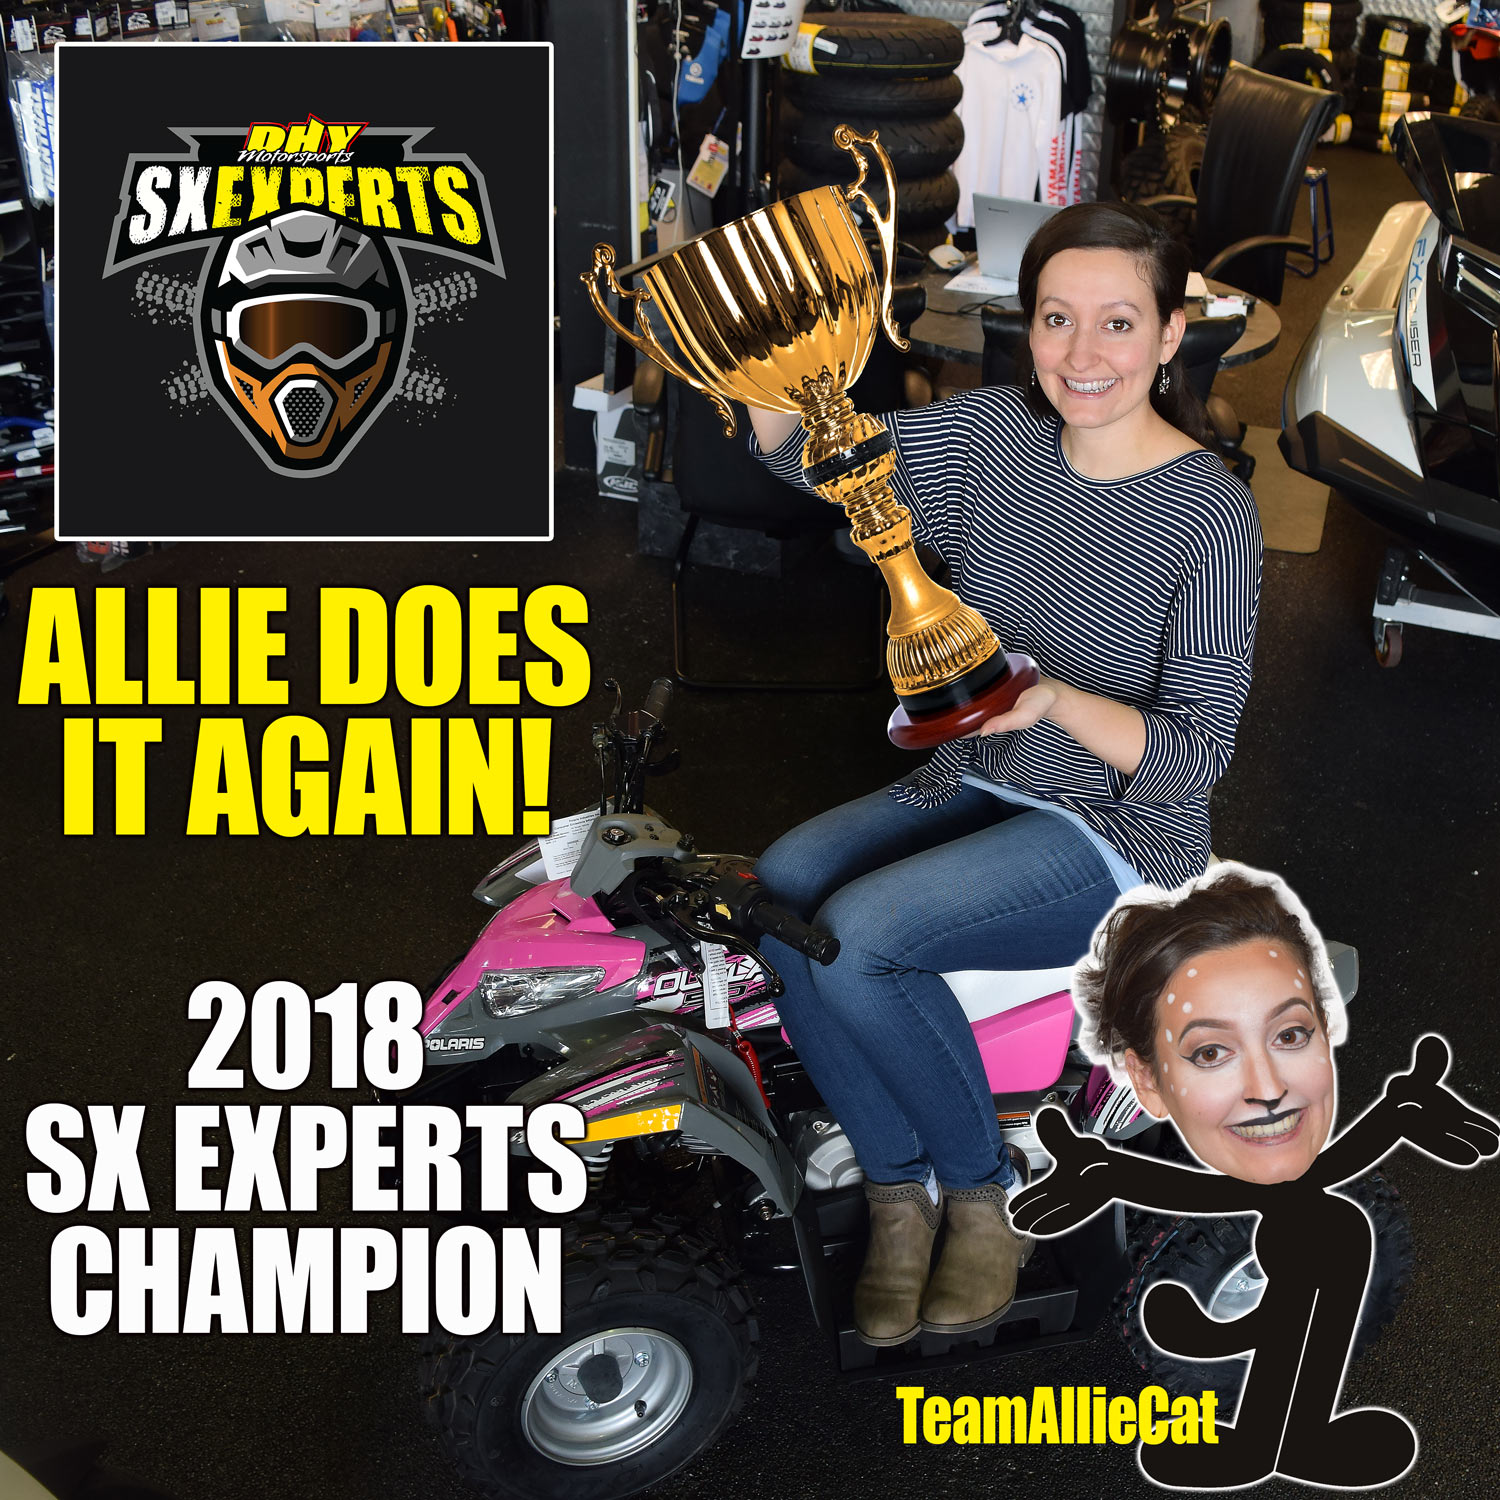 TeamAllieCat wins the 2018 DHY Motorsports Supercross Experts Championship